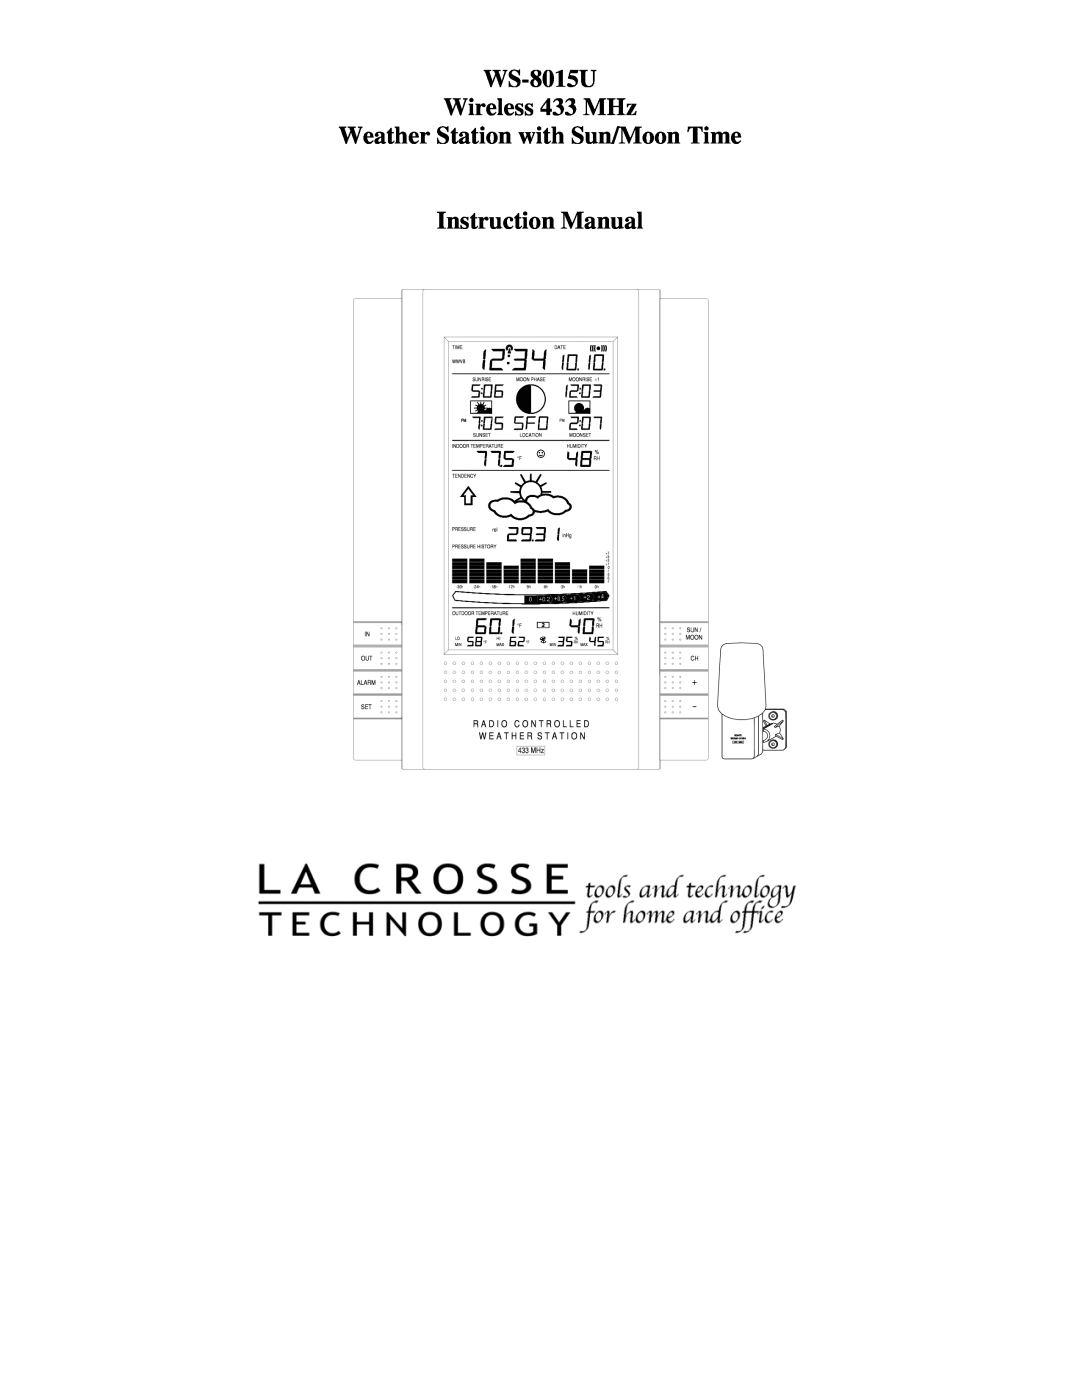 La Crosse Technology instruction manual WS-8015U Wireless 433 MHz, Weather Station with Sun/Moon Time 